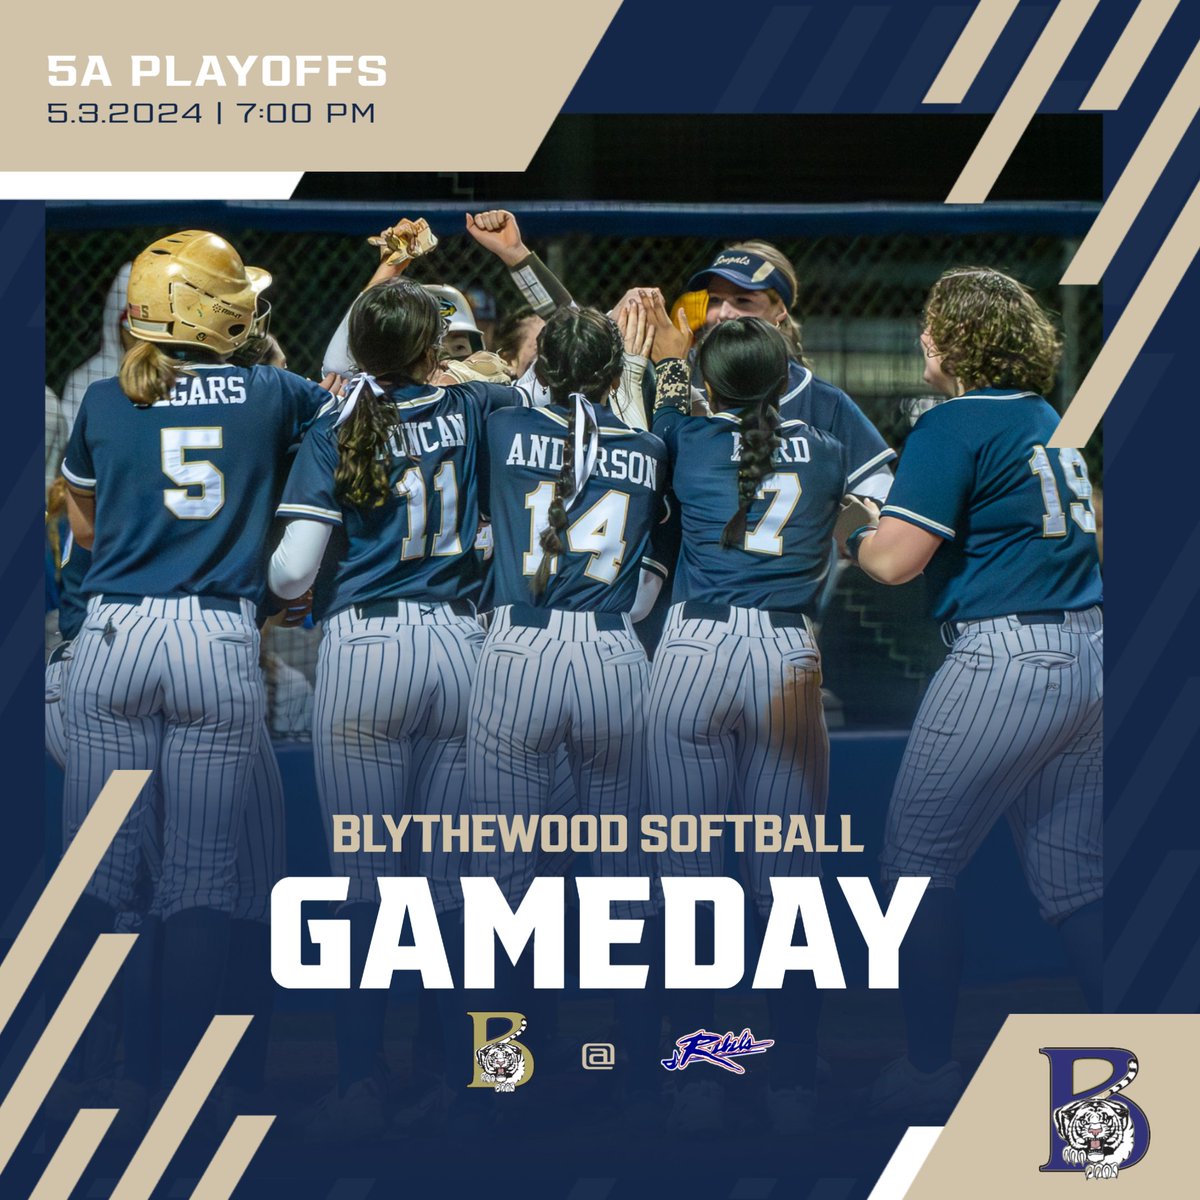 Bengals will head to Byrnes today for Game 2 of playoffs!